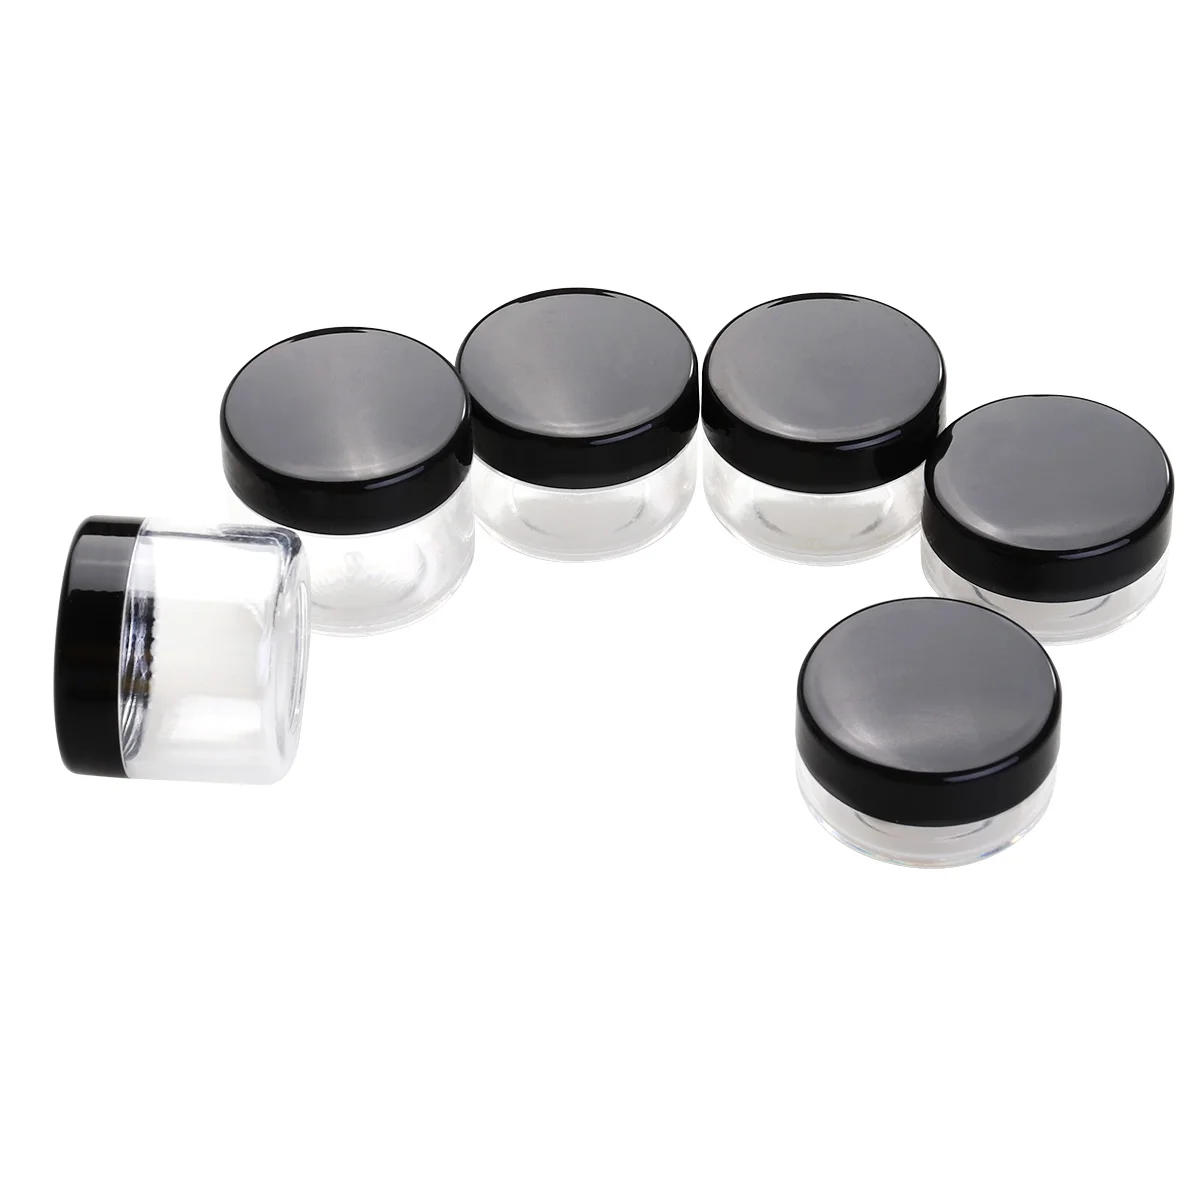 

6pcs Makeup Sample Jars with lids for Make, Eye Shadow, Creams Sample, Including 10g/ 15g/ 20g, Each Size of 2pcs Glass